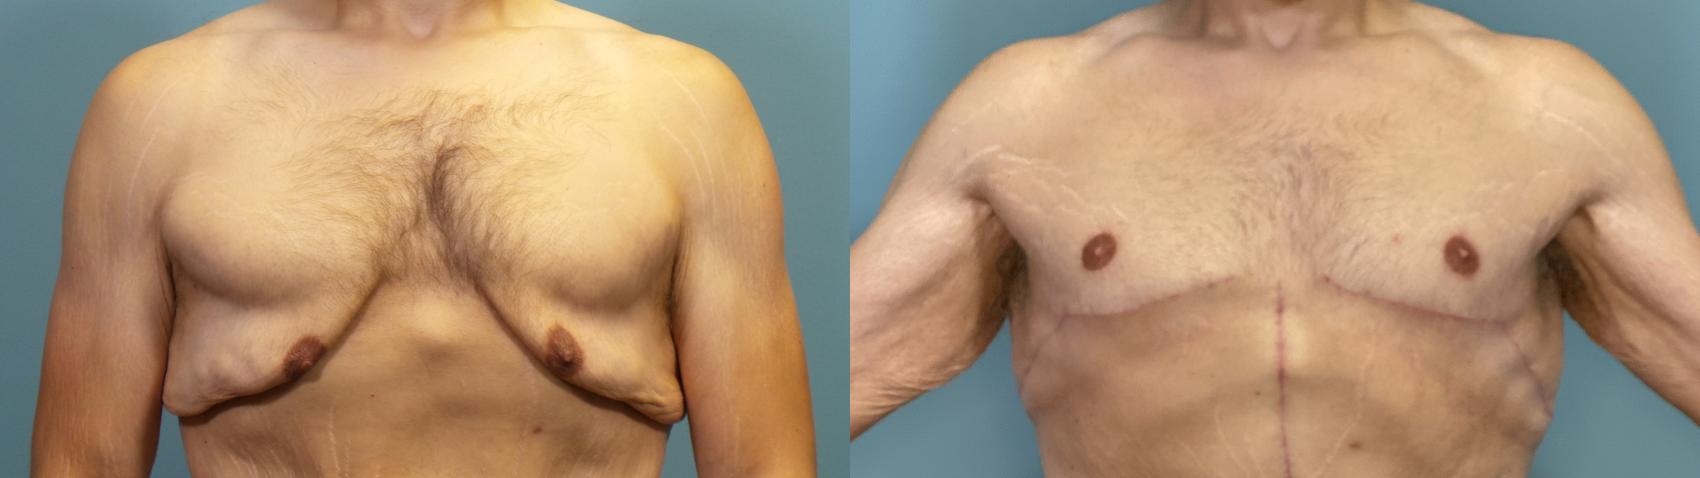 Before & After Male Breast Reduction (Gynecomastia) Case 326 Front View in Portland, OR